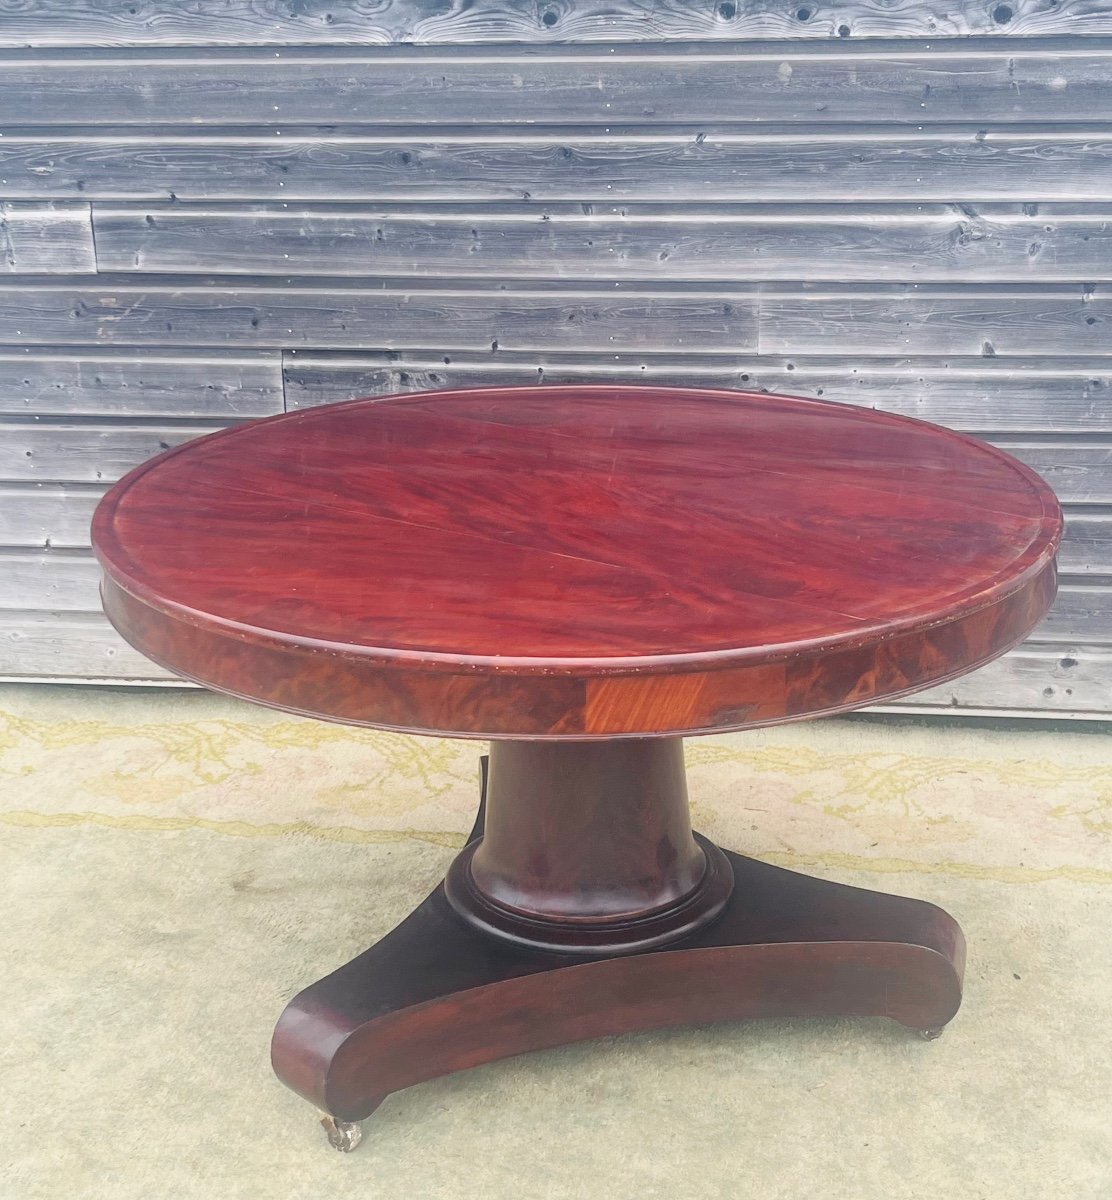 Very Large Mahogany Pedestal Table From The Restoration Period